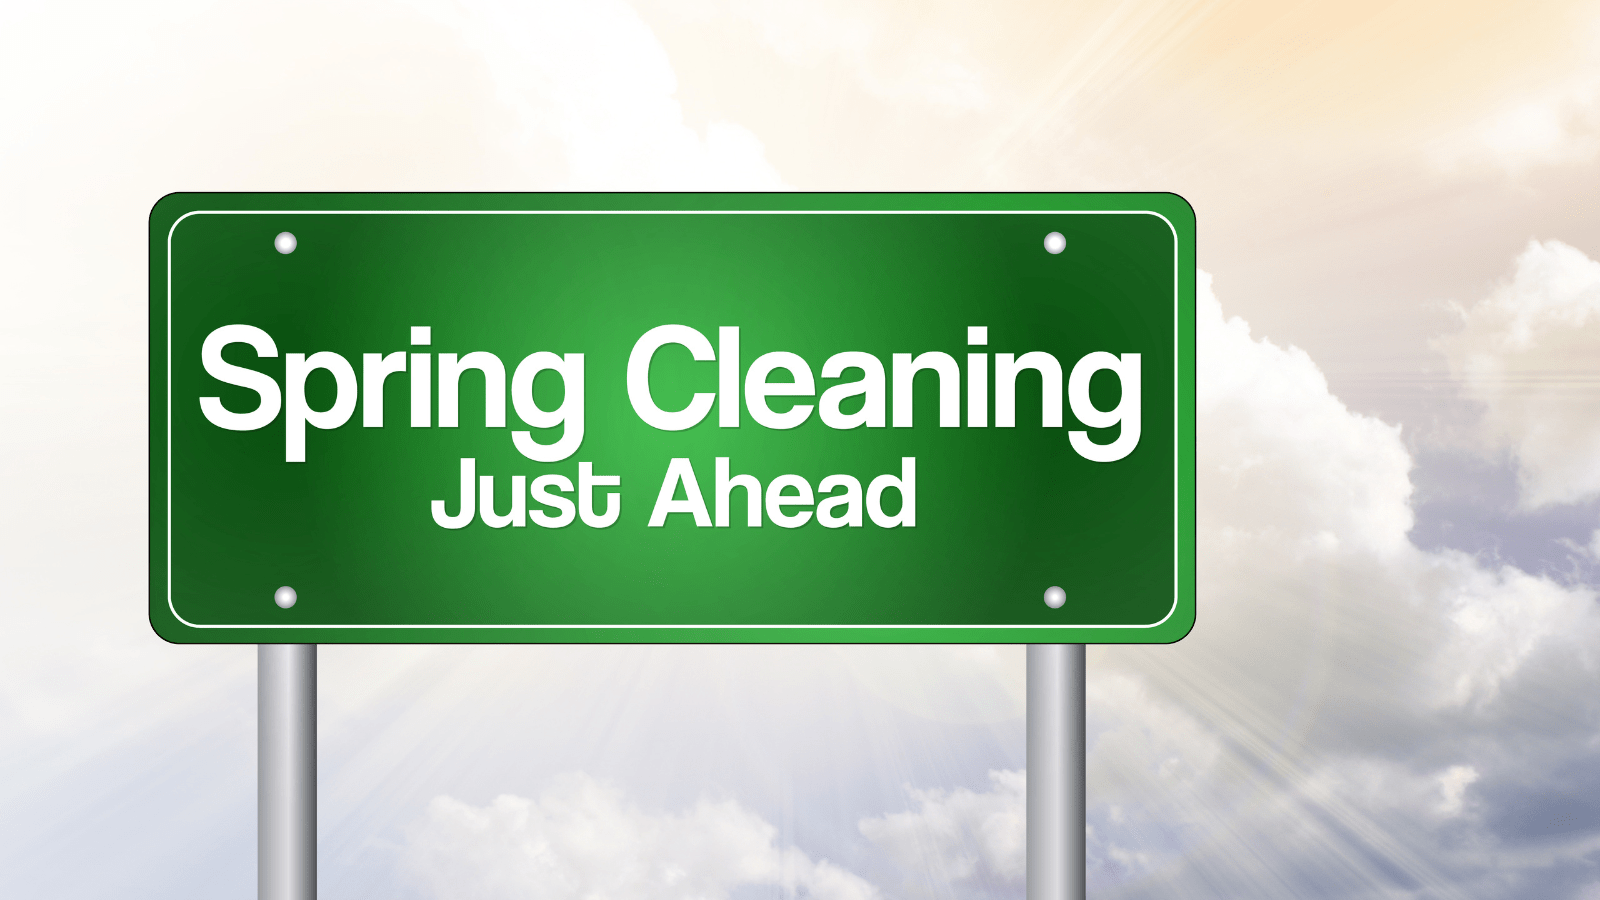 Spring Cleaning Just Ahead